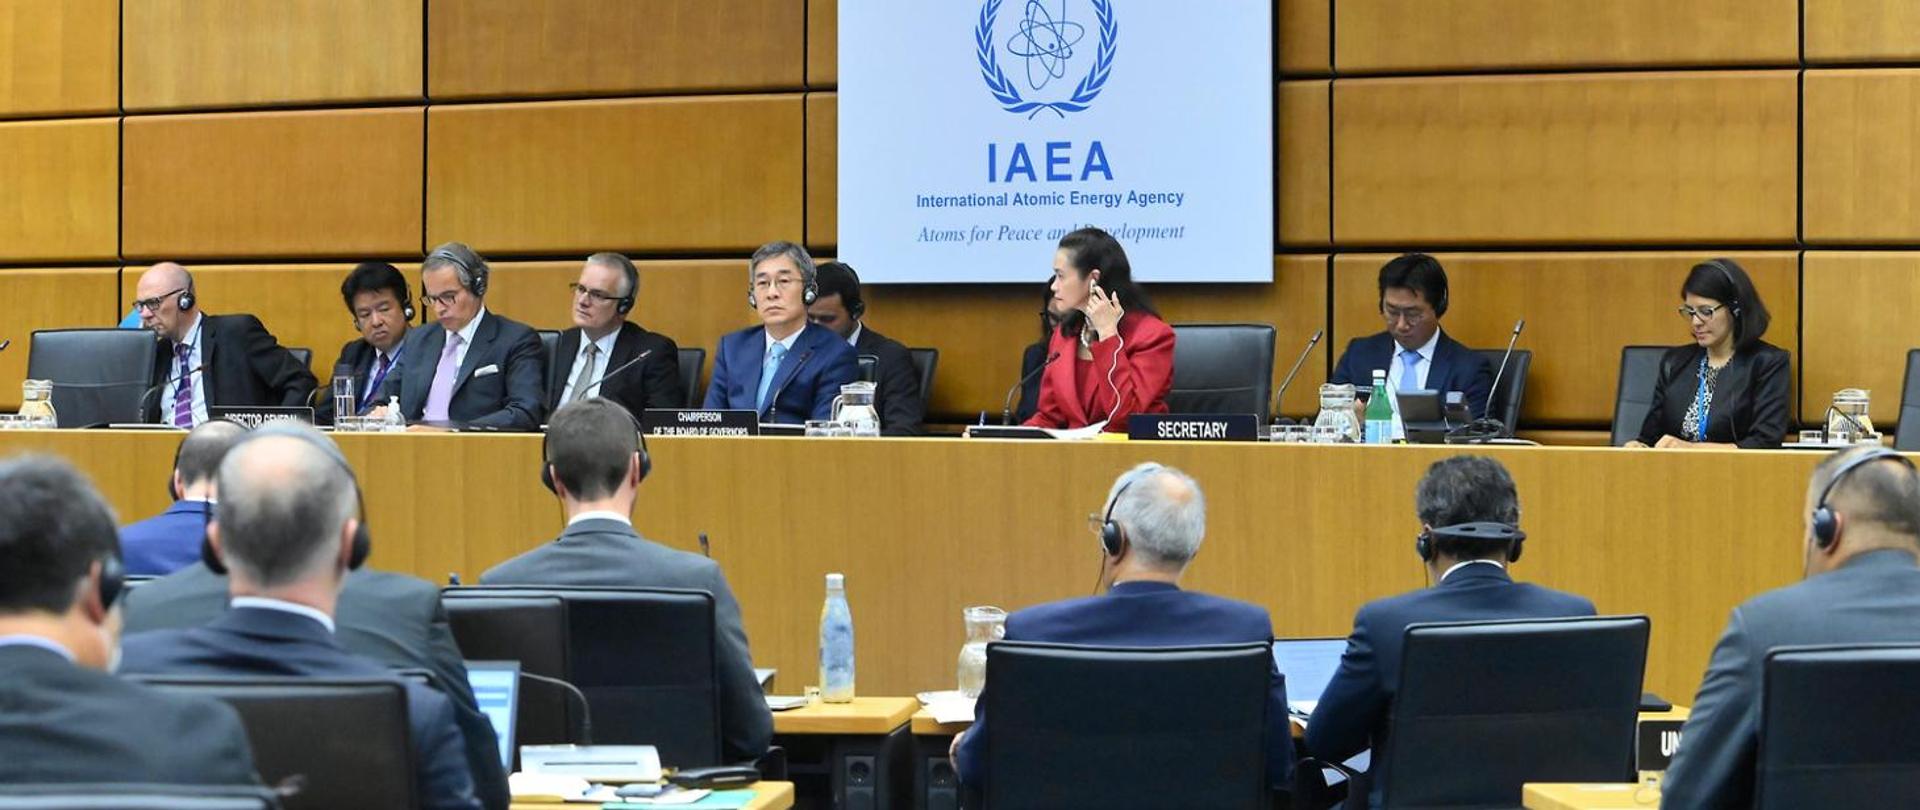 The IAEA Board of Governors - participants sit in front of the IAEA leadership